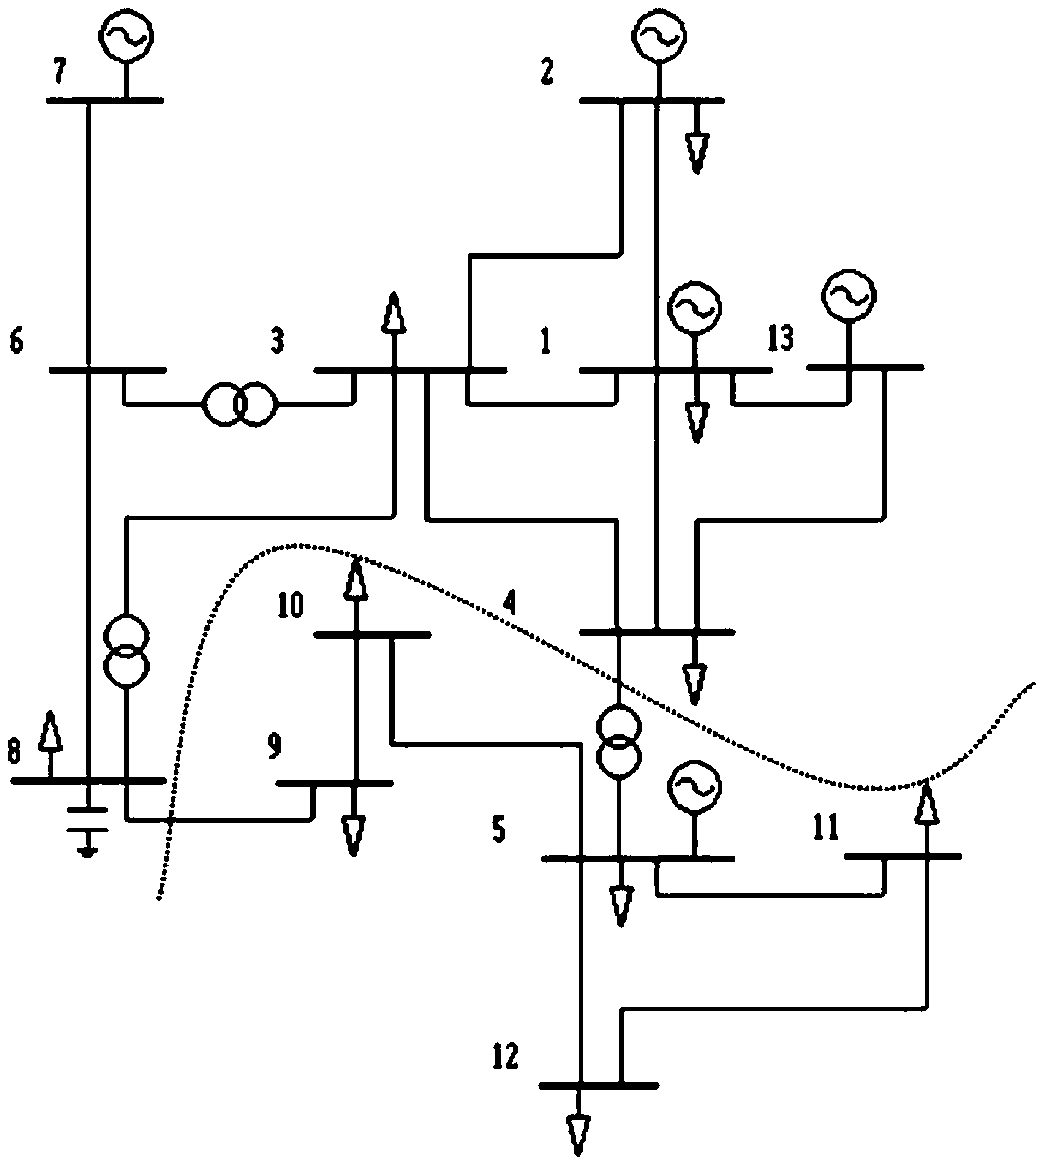 An Equivalence Method of Power Grid Based on Phase Angle Difference of Tie Lines